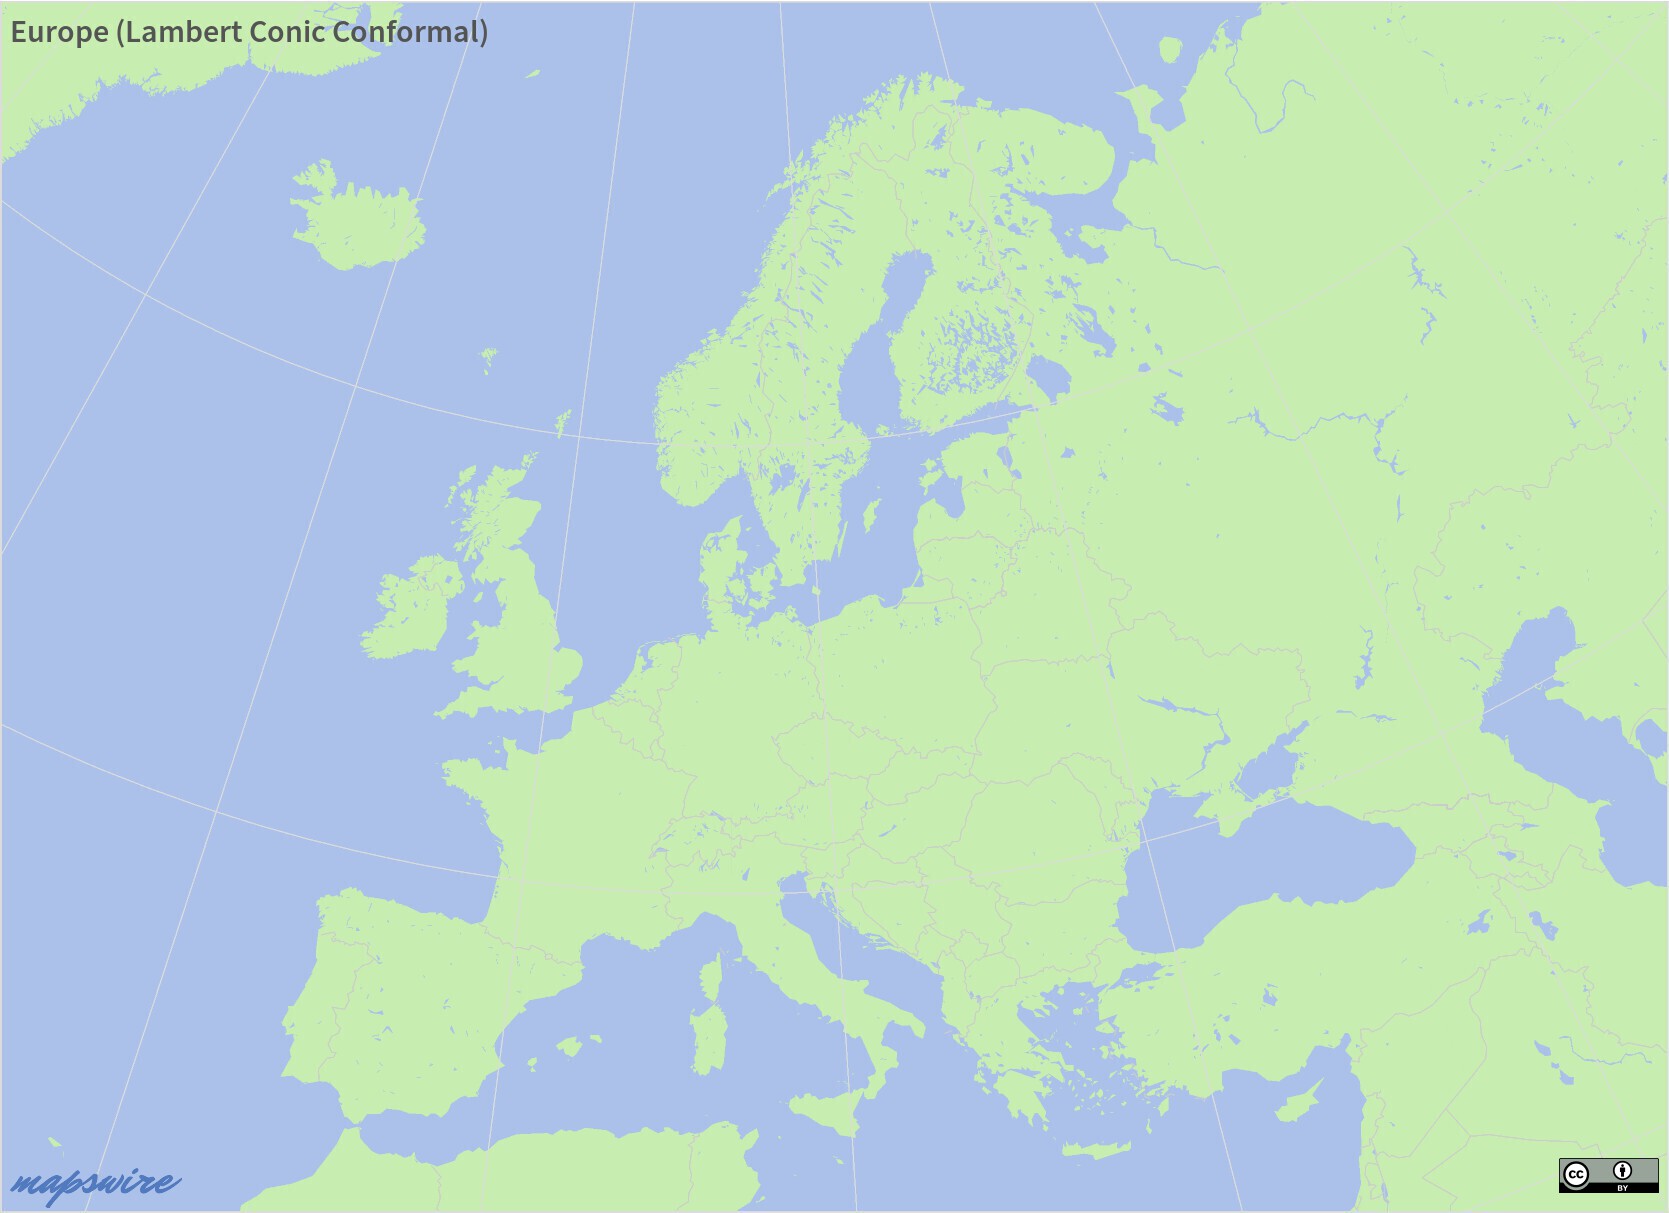 Europe (Lambert Conic Conformal) – License: CC BY 4.0